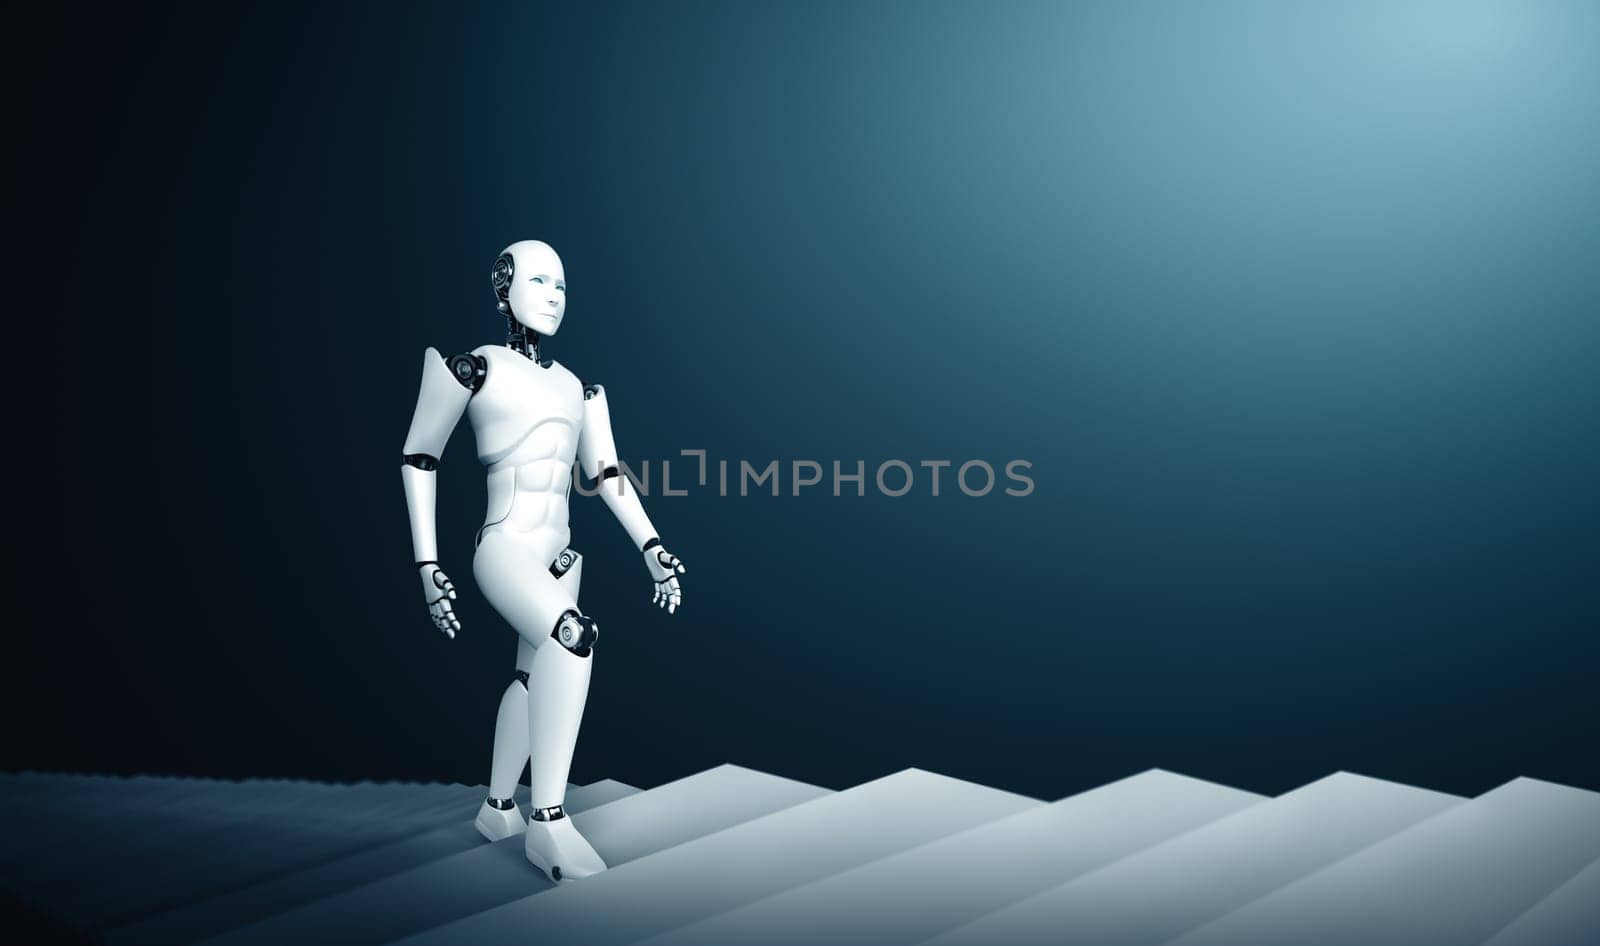 XAI 3d illustration robot humanoid walk up stair to success and goals achievement. Concept of AI thinking brain and machine learning process for the 4th fourth industrial revolution.